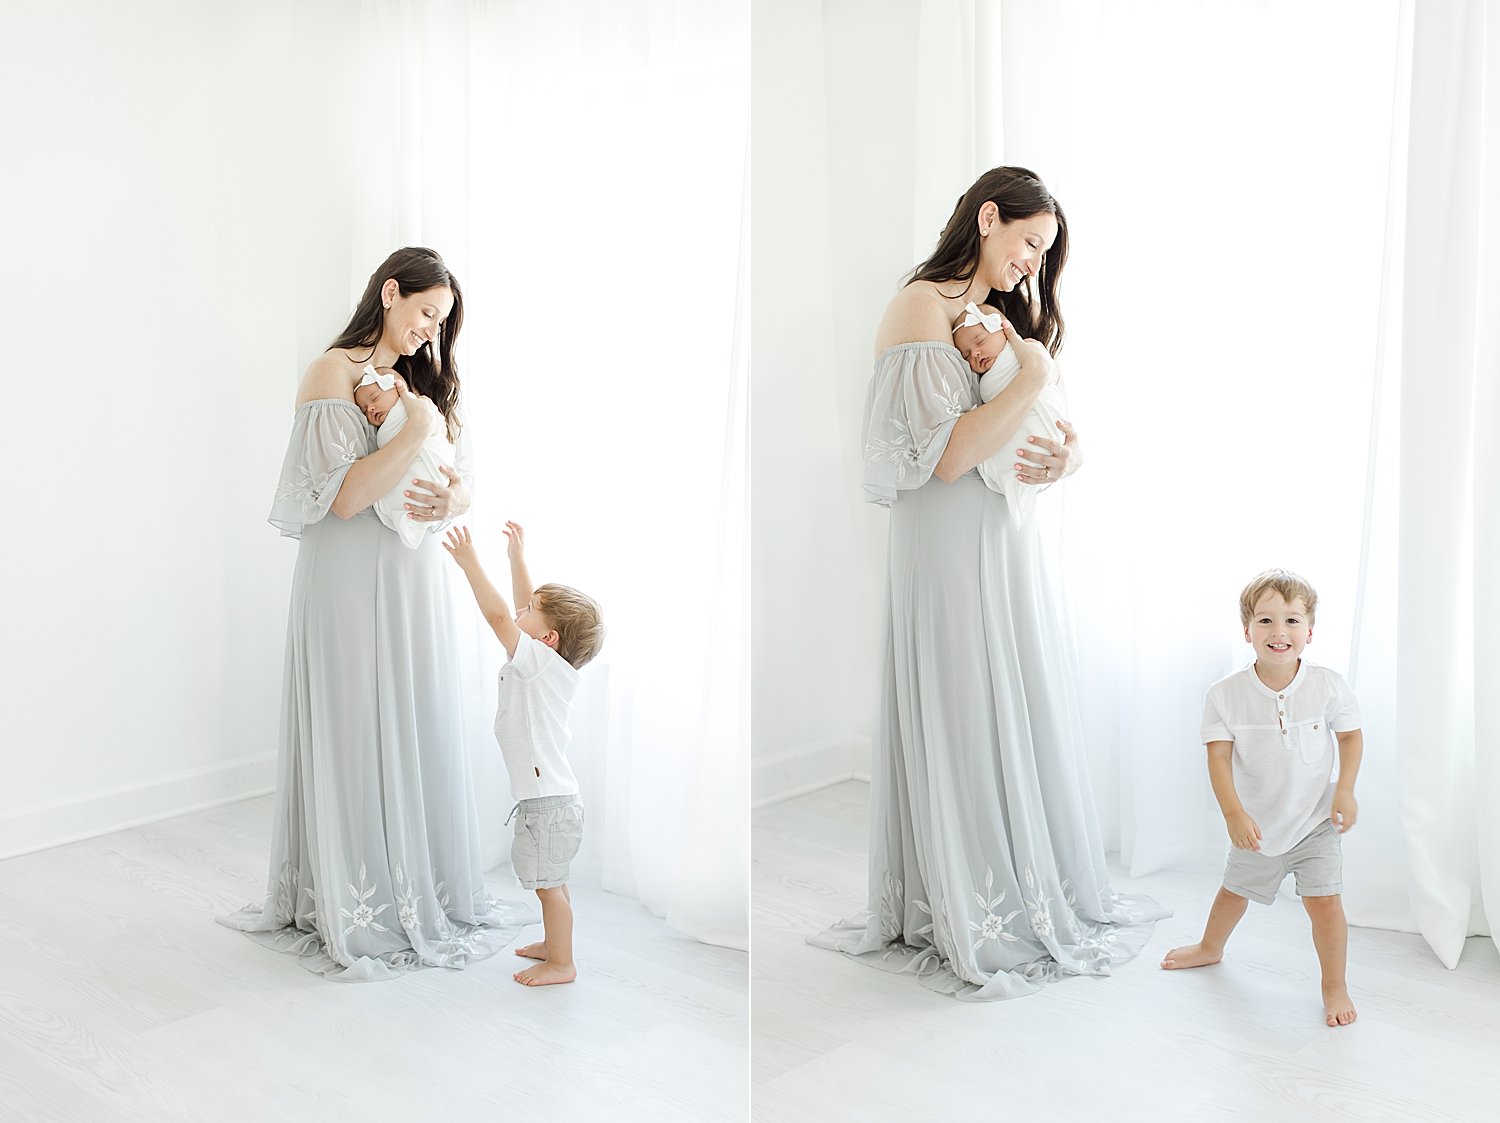 Mom with son and daughter during newborn photoshoot | Kristin Wood Photography